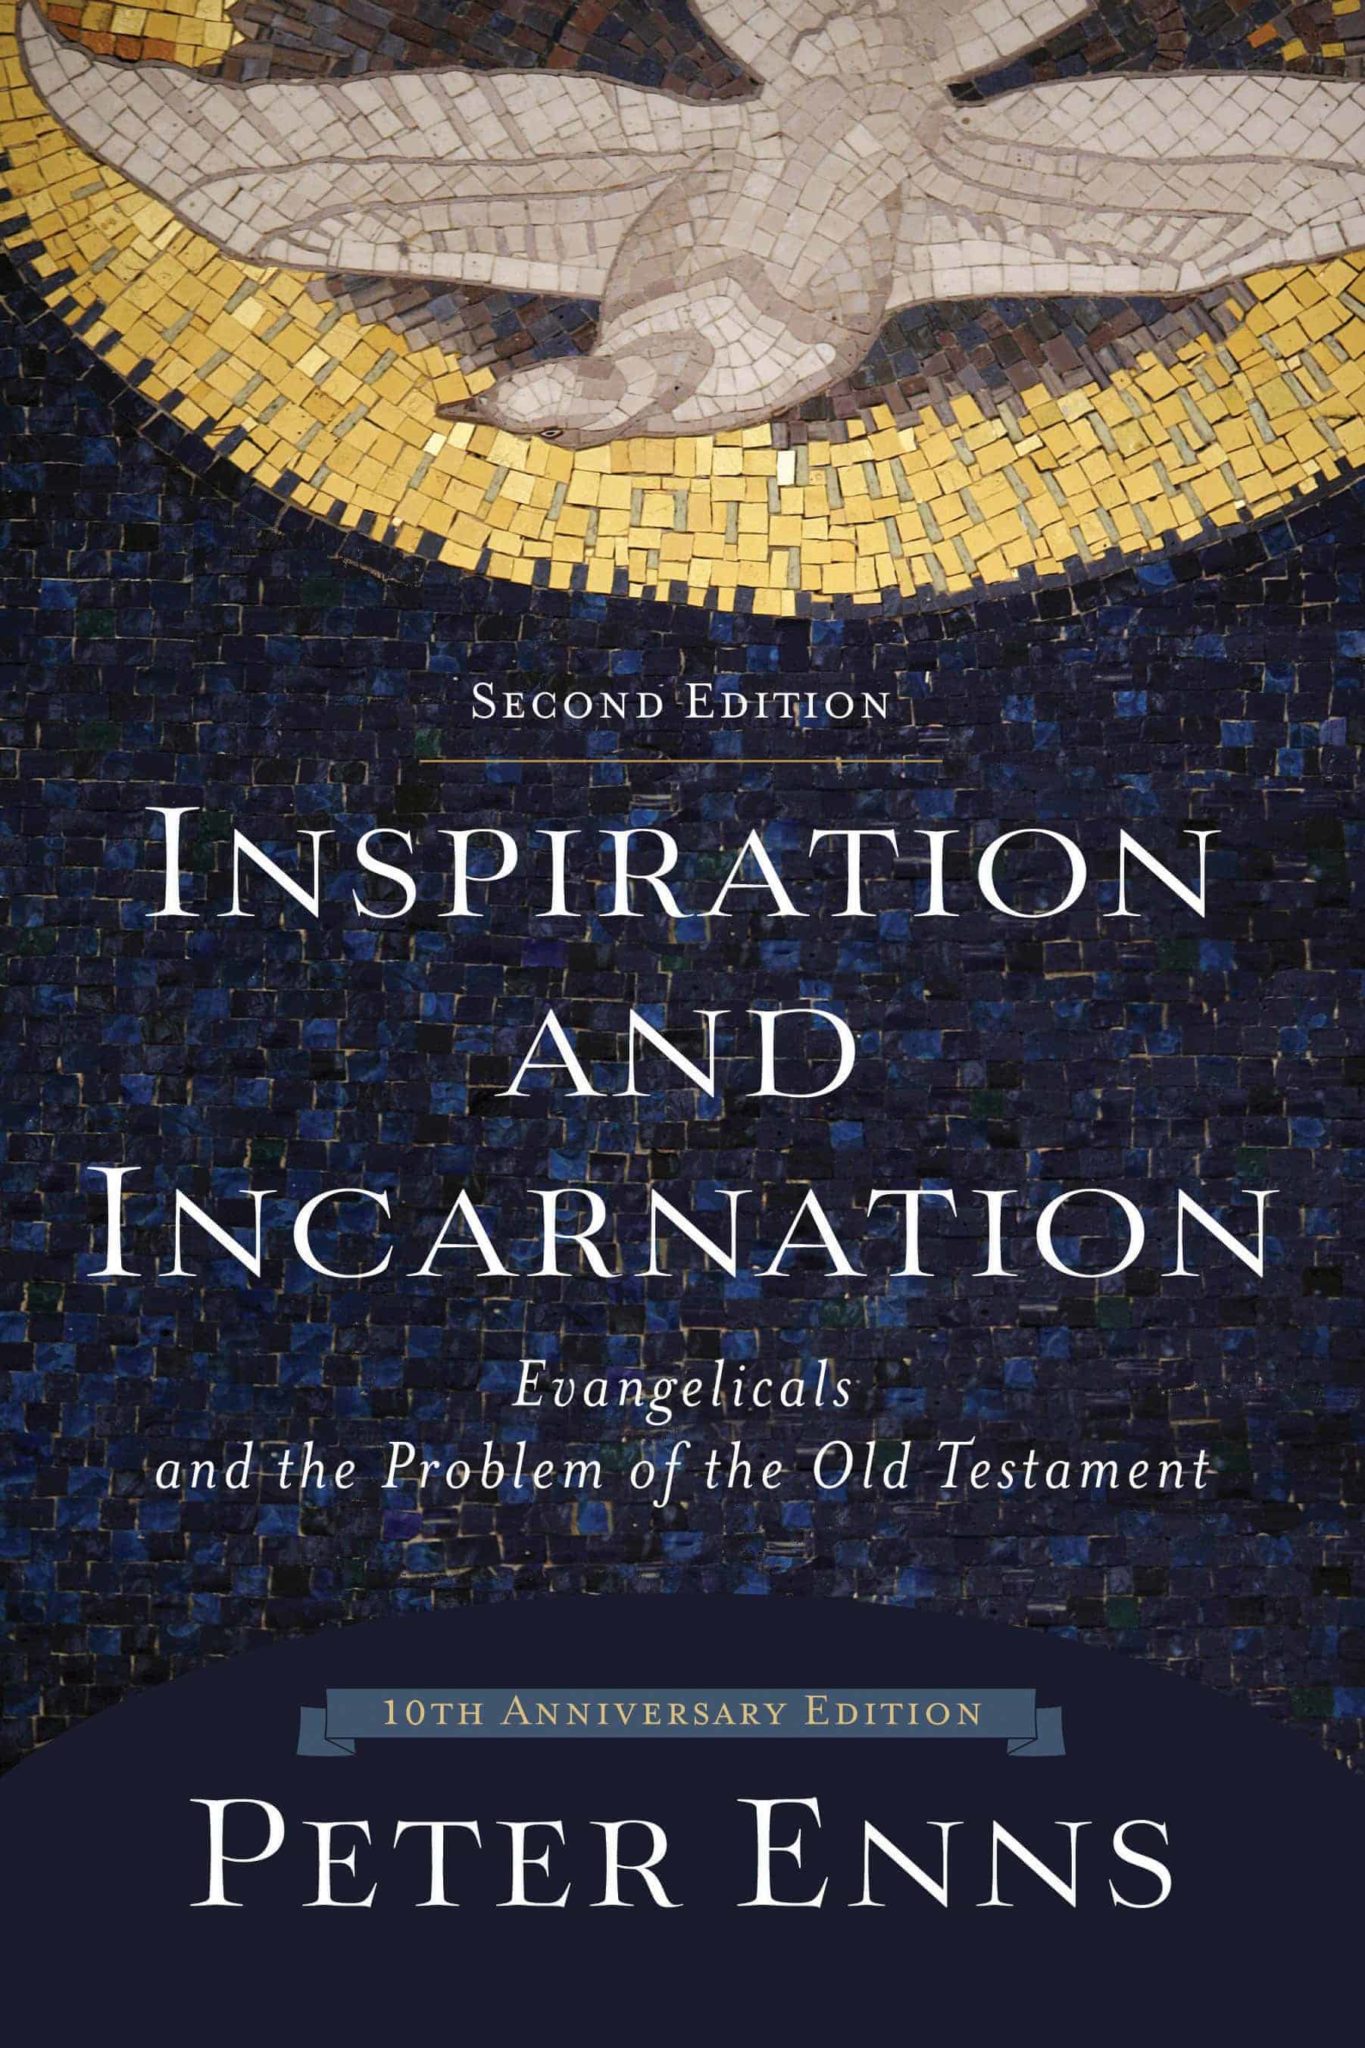 10th anniversary edition of Inspiration and Incarnation coming this summer